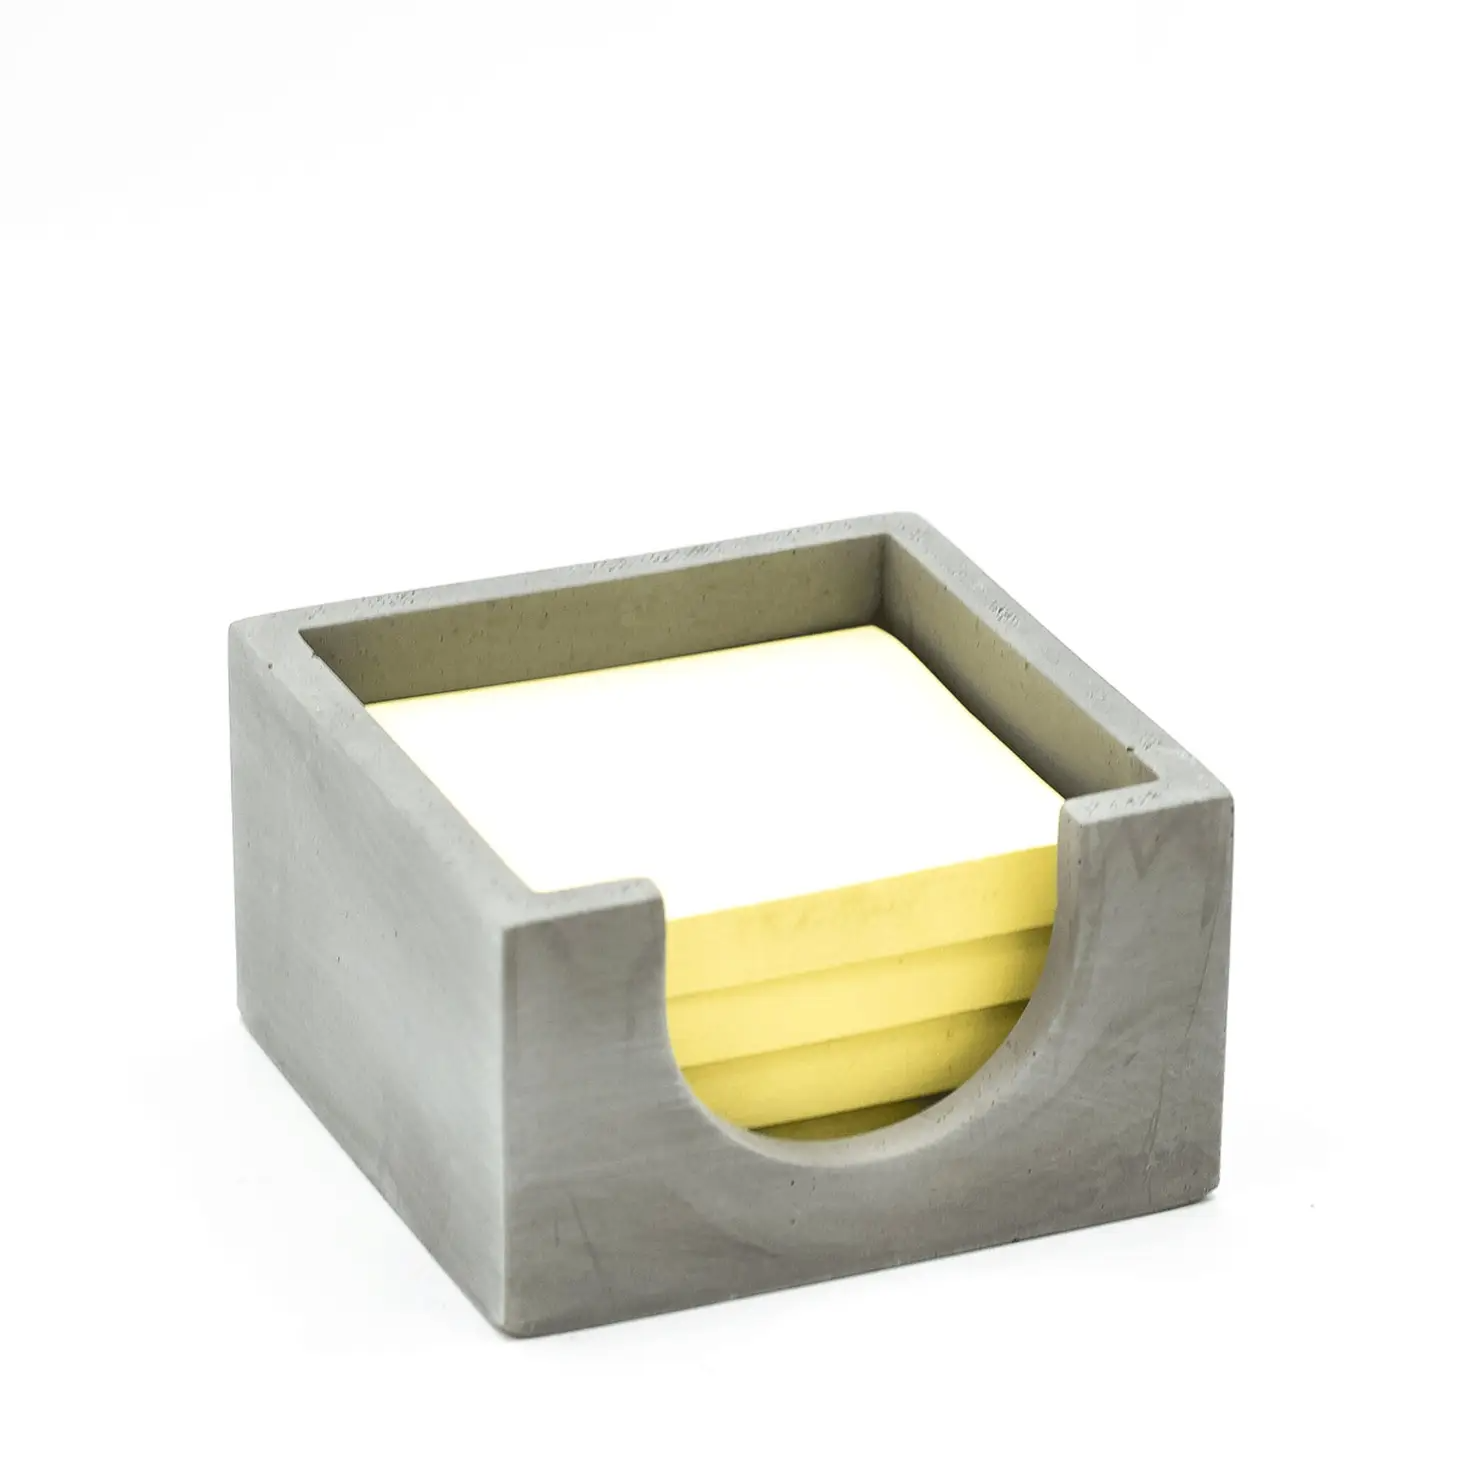 Concrete Sticky Note Holder - Large - Home Works